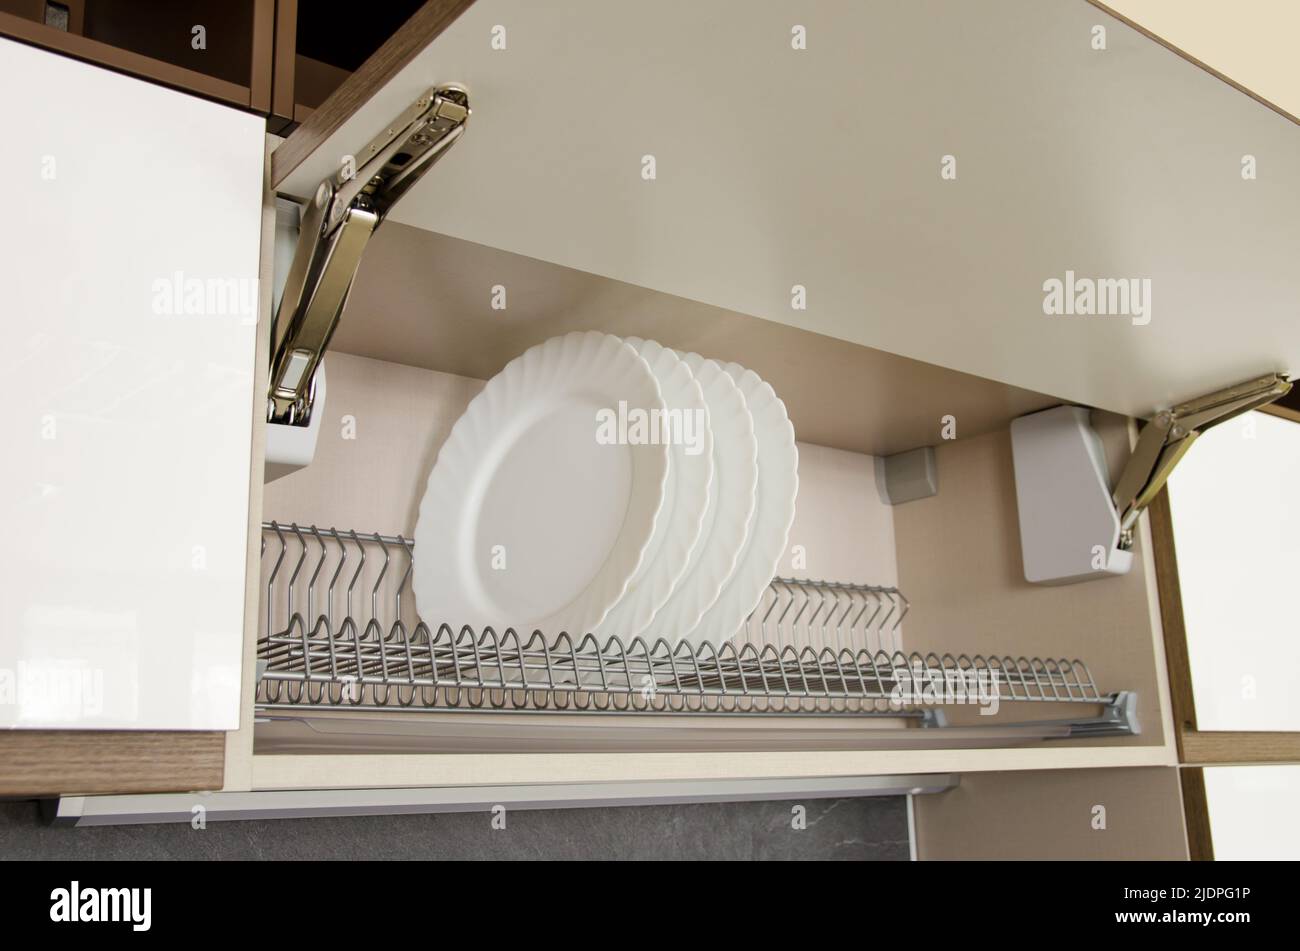 Dish dryer integrated in a wall cabinet with a door that opens upwards. Stock Photo